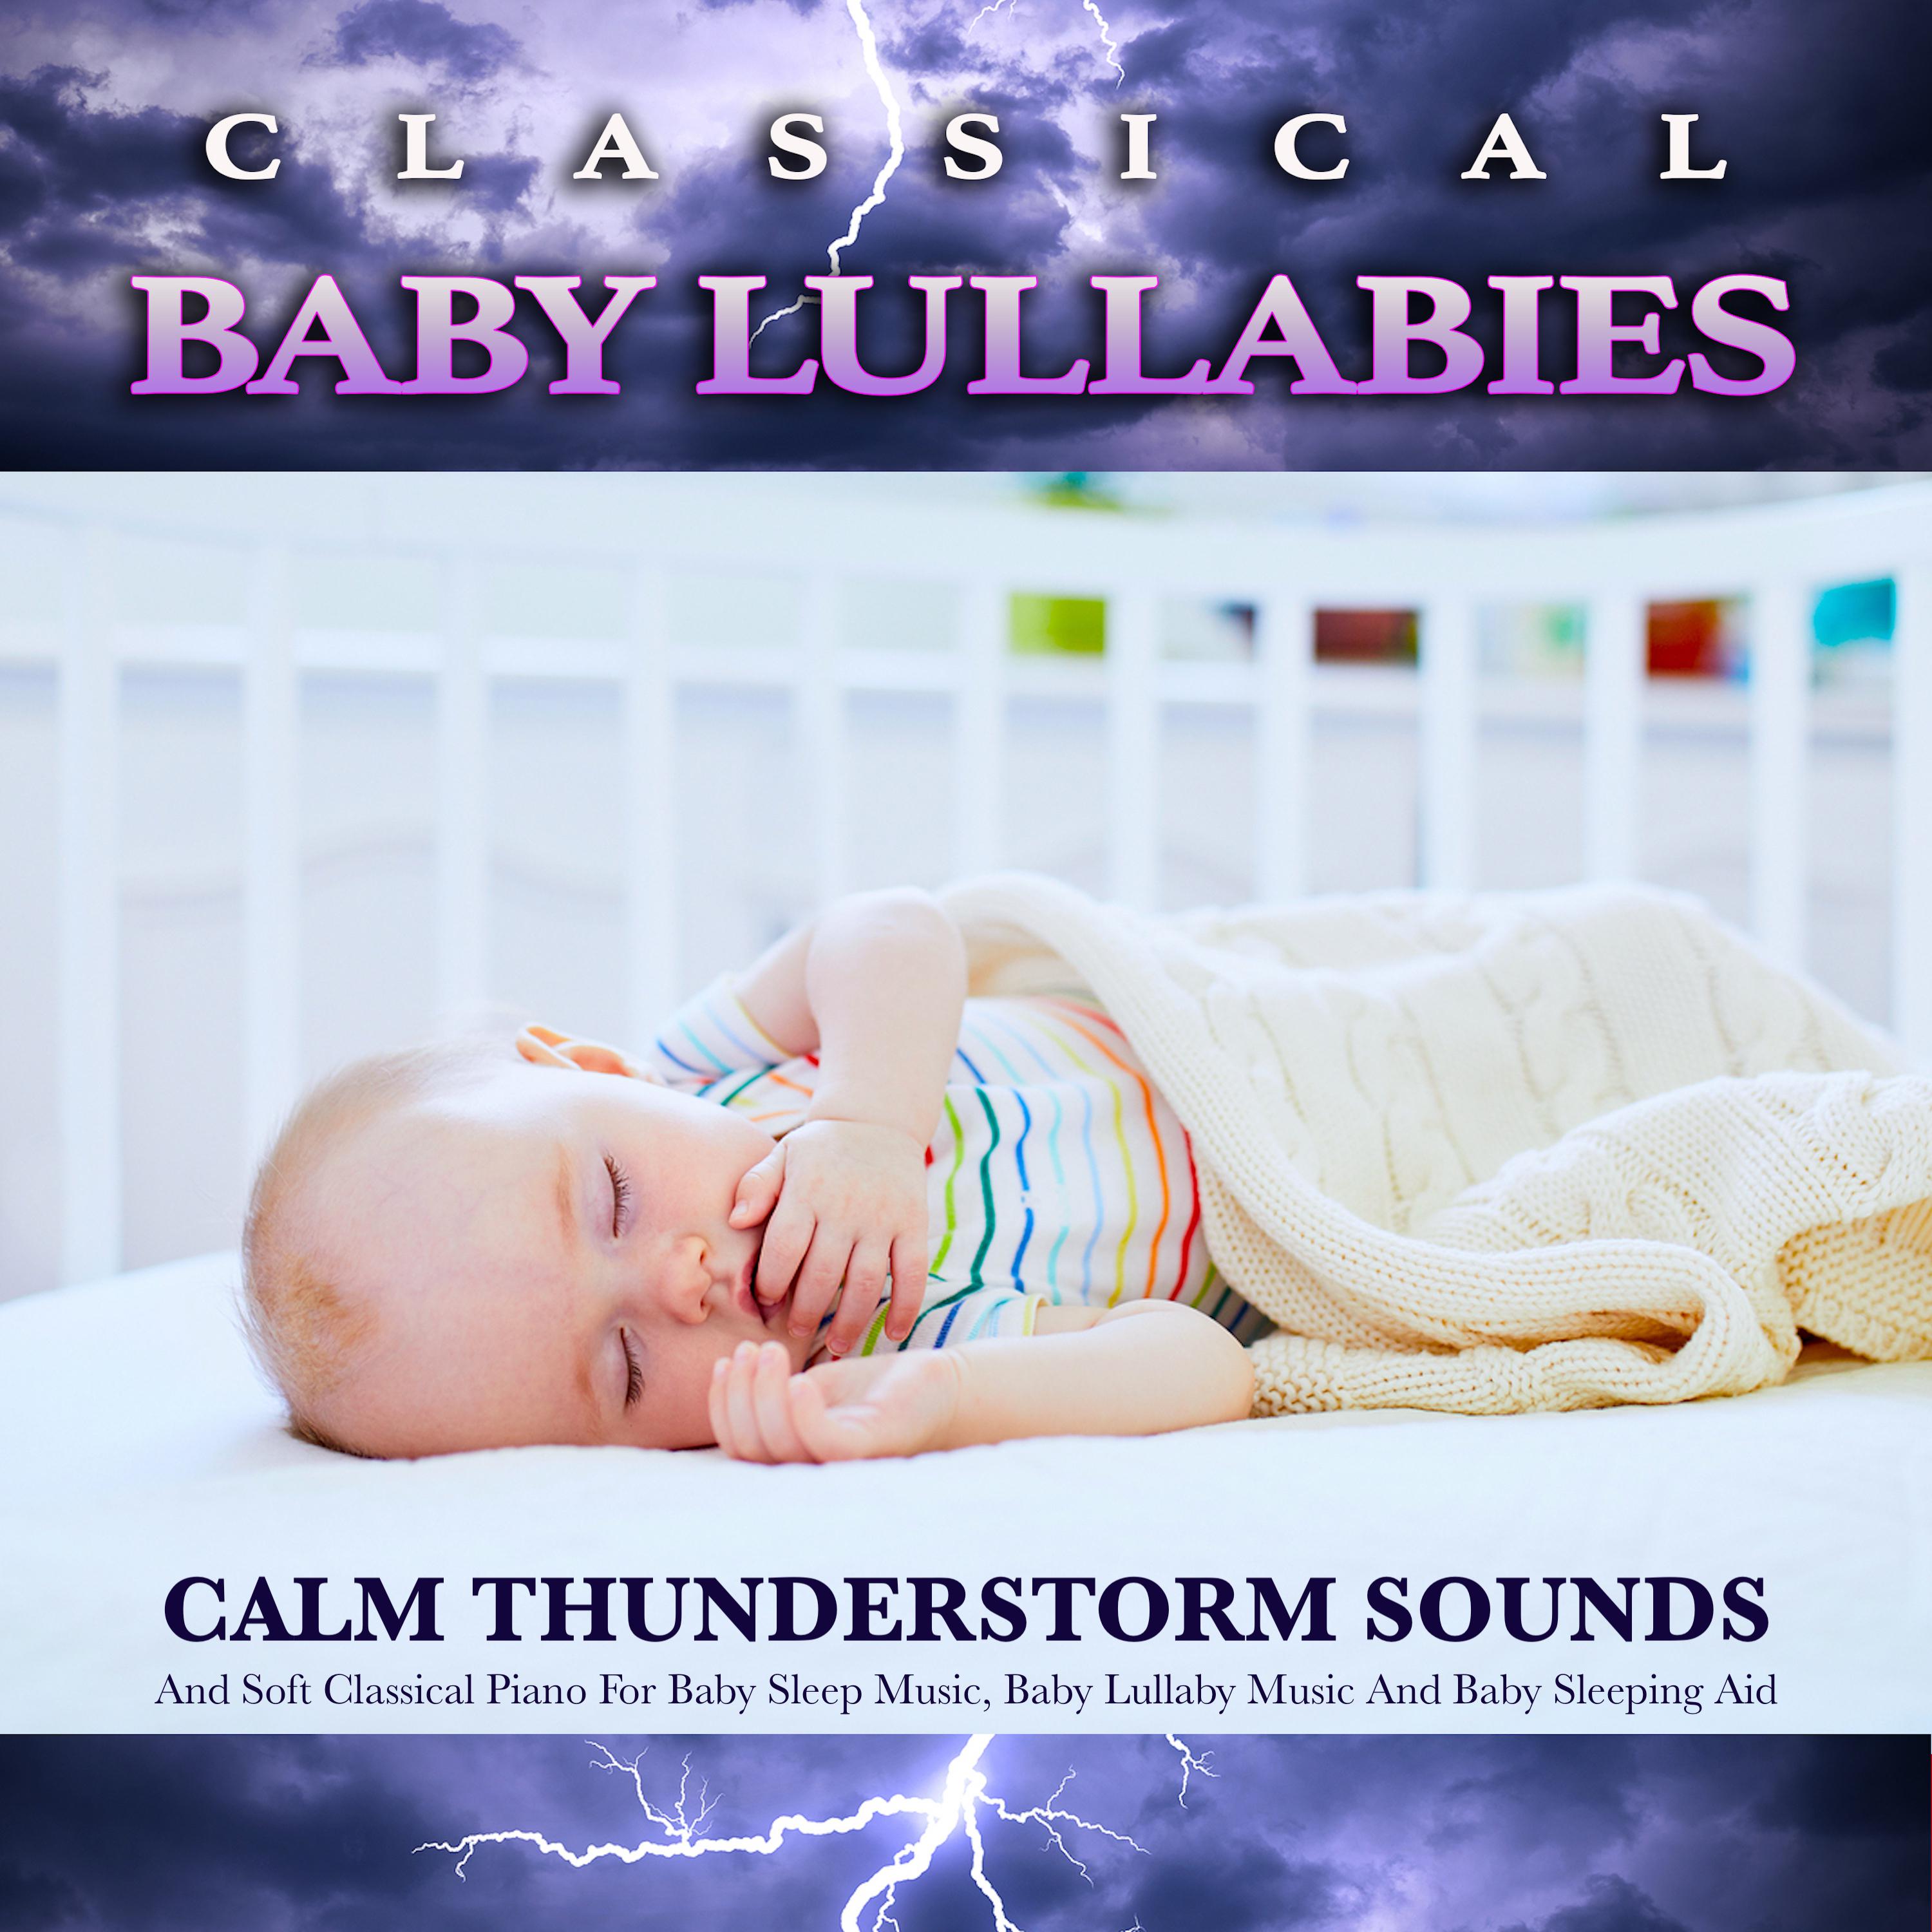 Song Without Words - Mendelssohn - Baby Lullaby - Baby Sleep Music - Classical Piano and Thunderstorm Sounds For Sleep